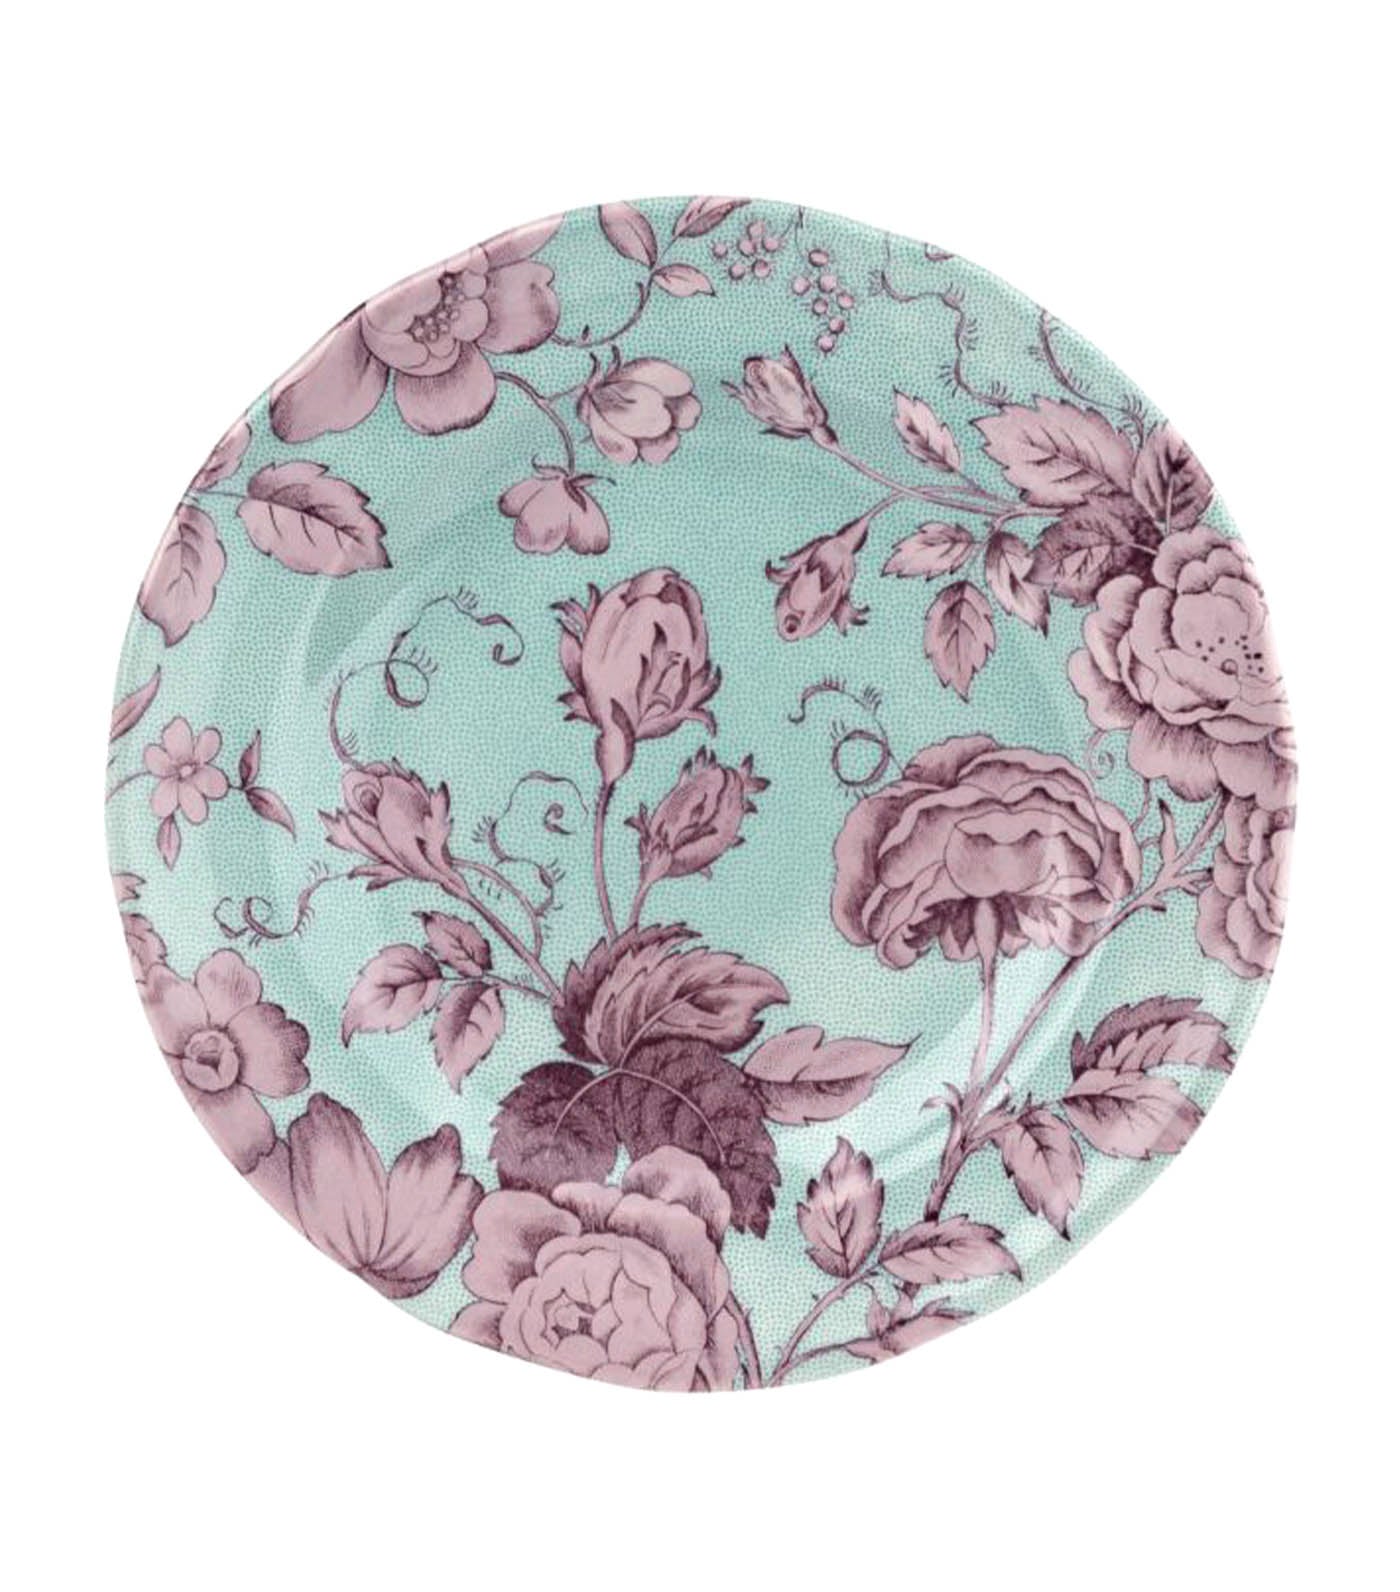  Spode Kingsley Collection - Teal